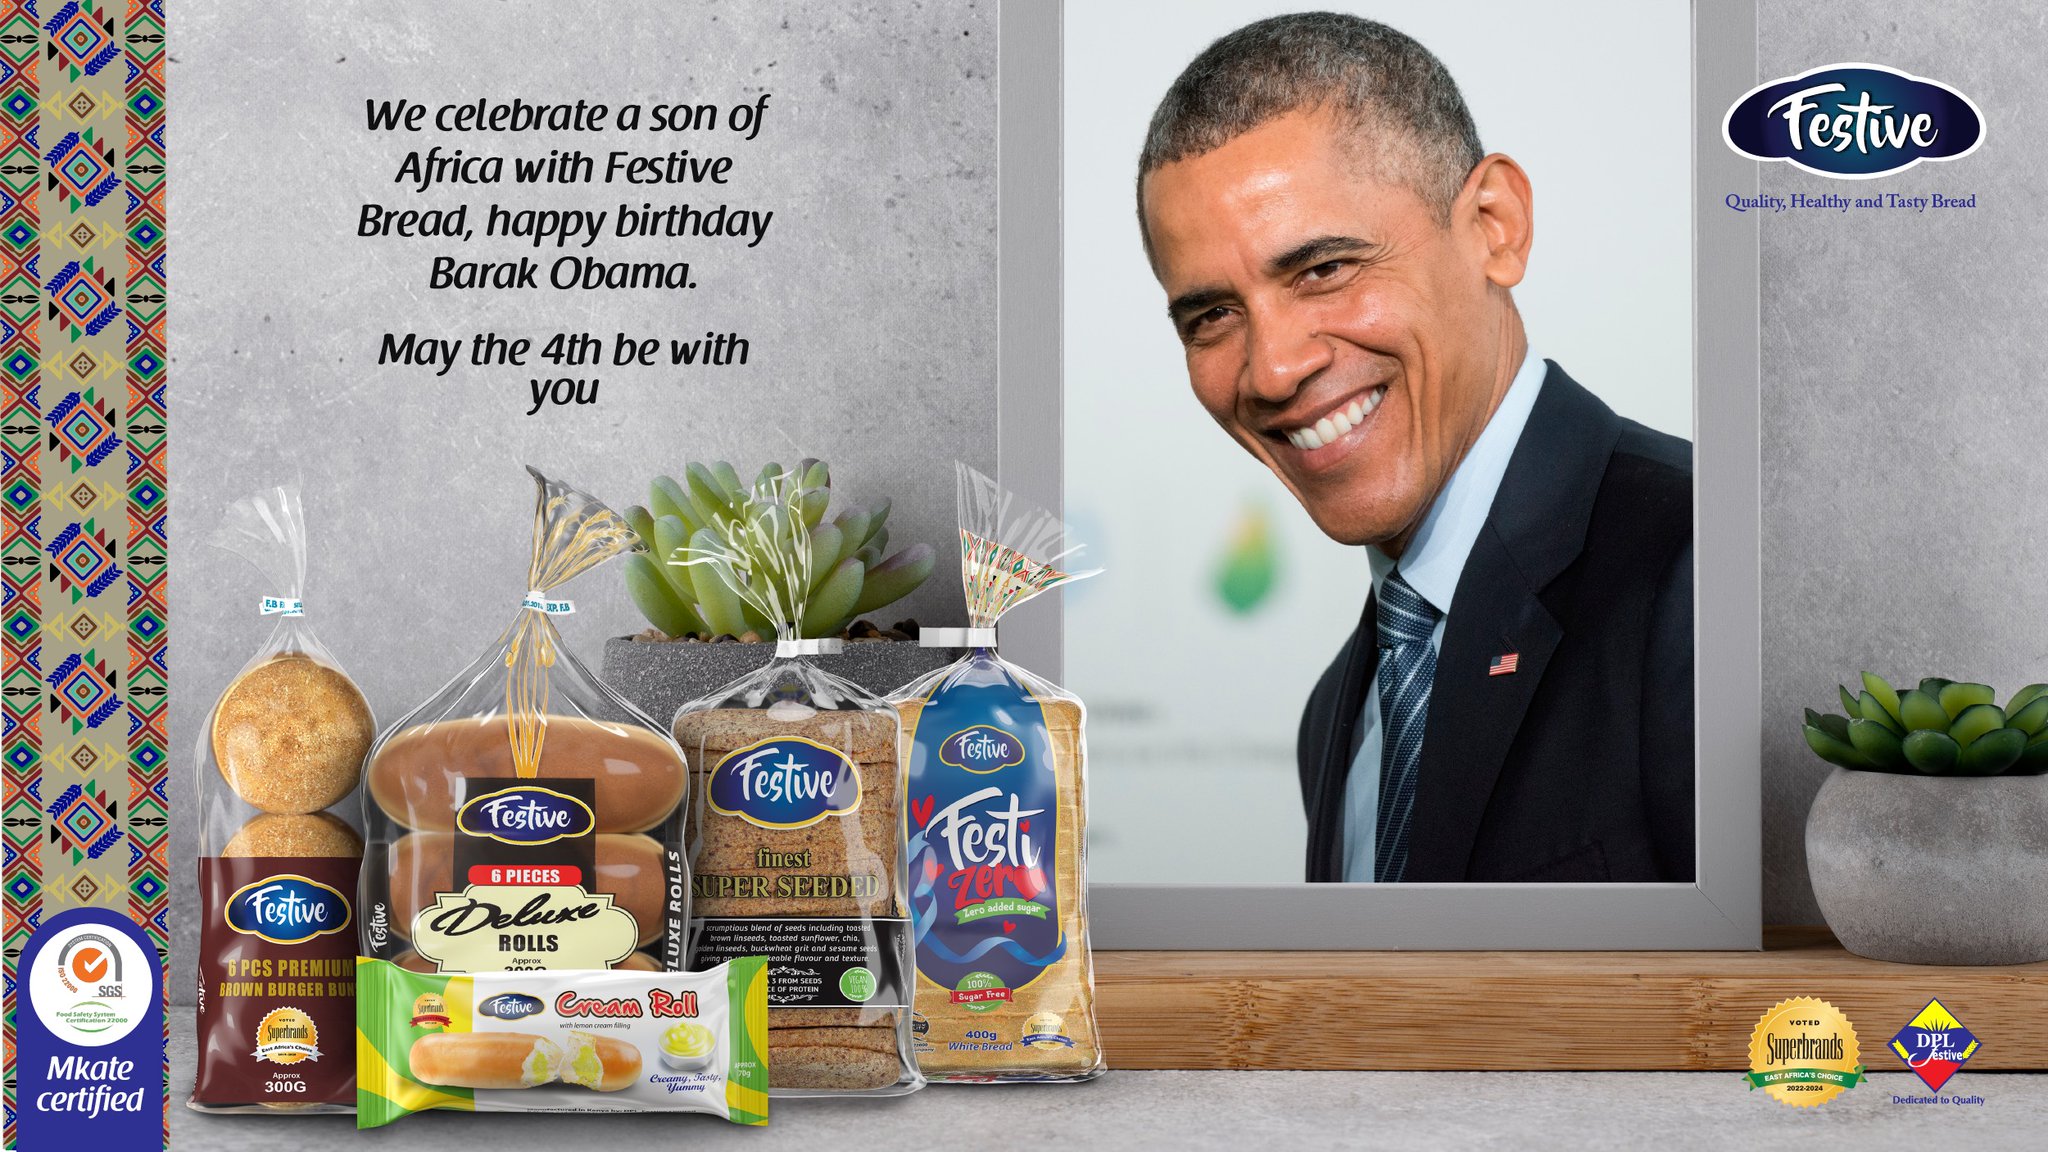 A happy birthday to a son of Africa and Kenya. HBD Barack Obama  